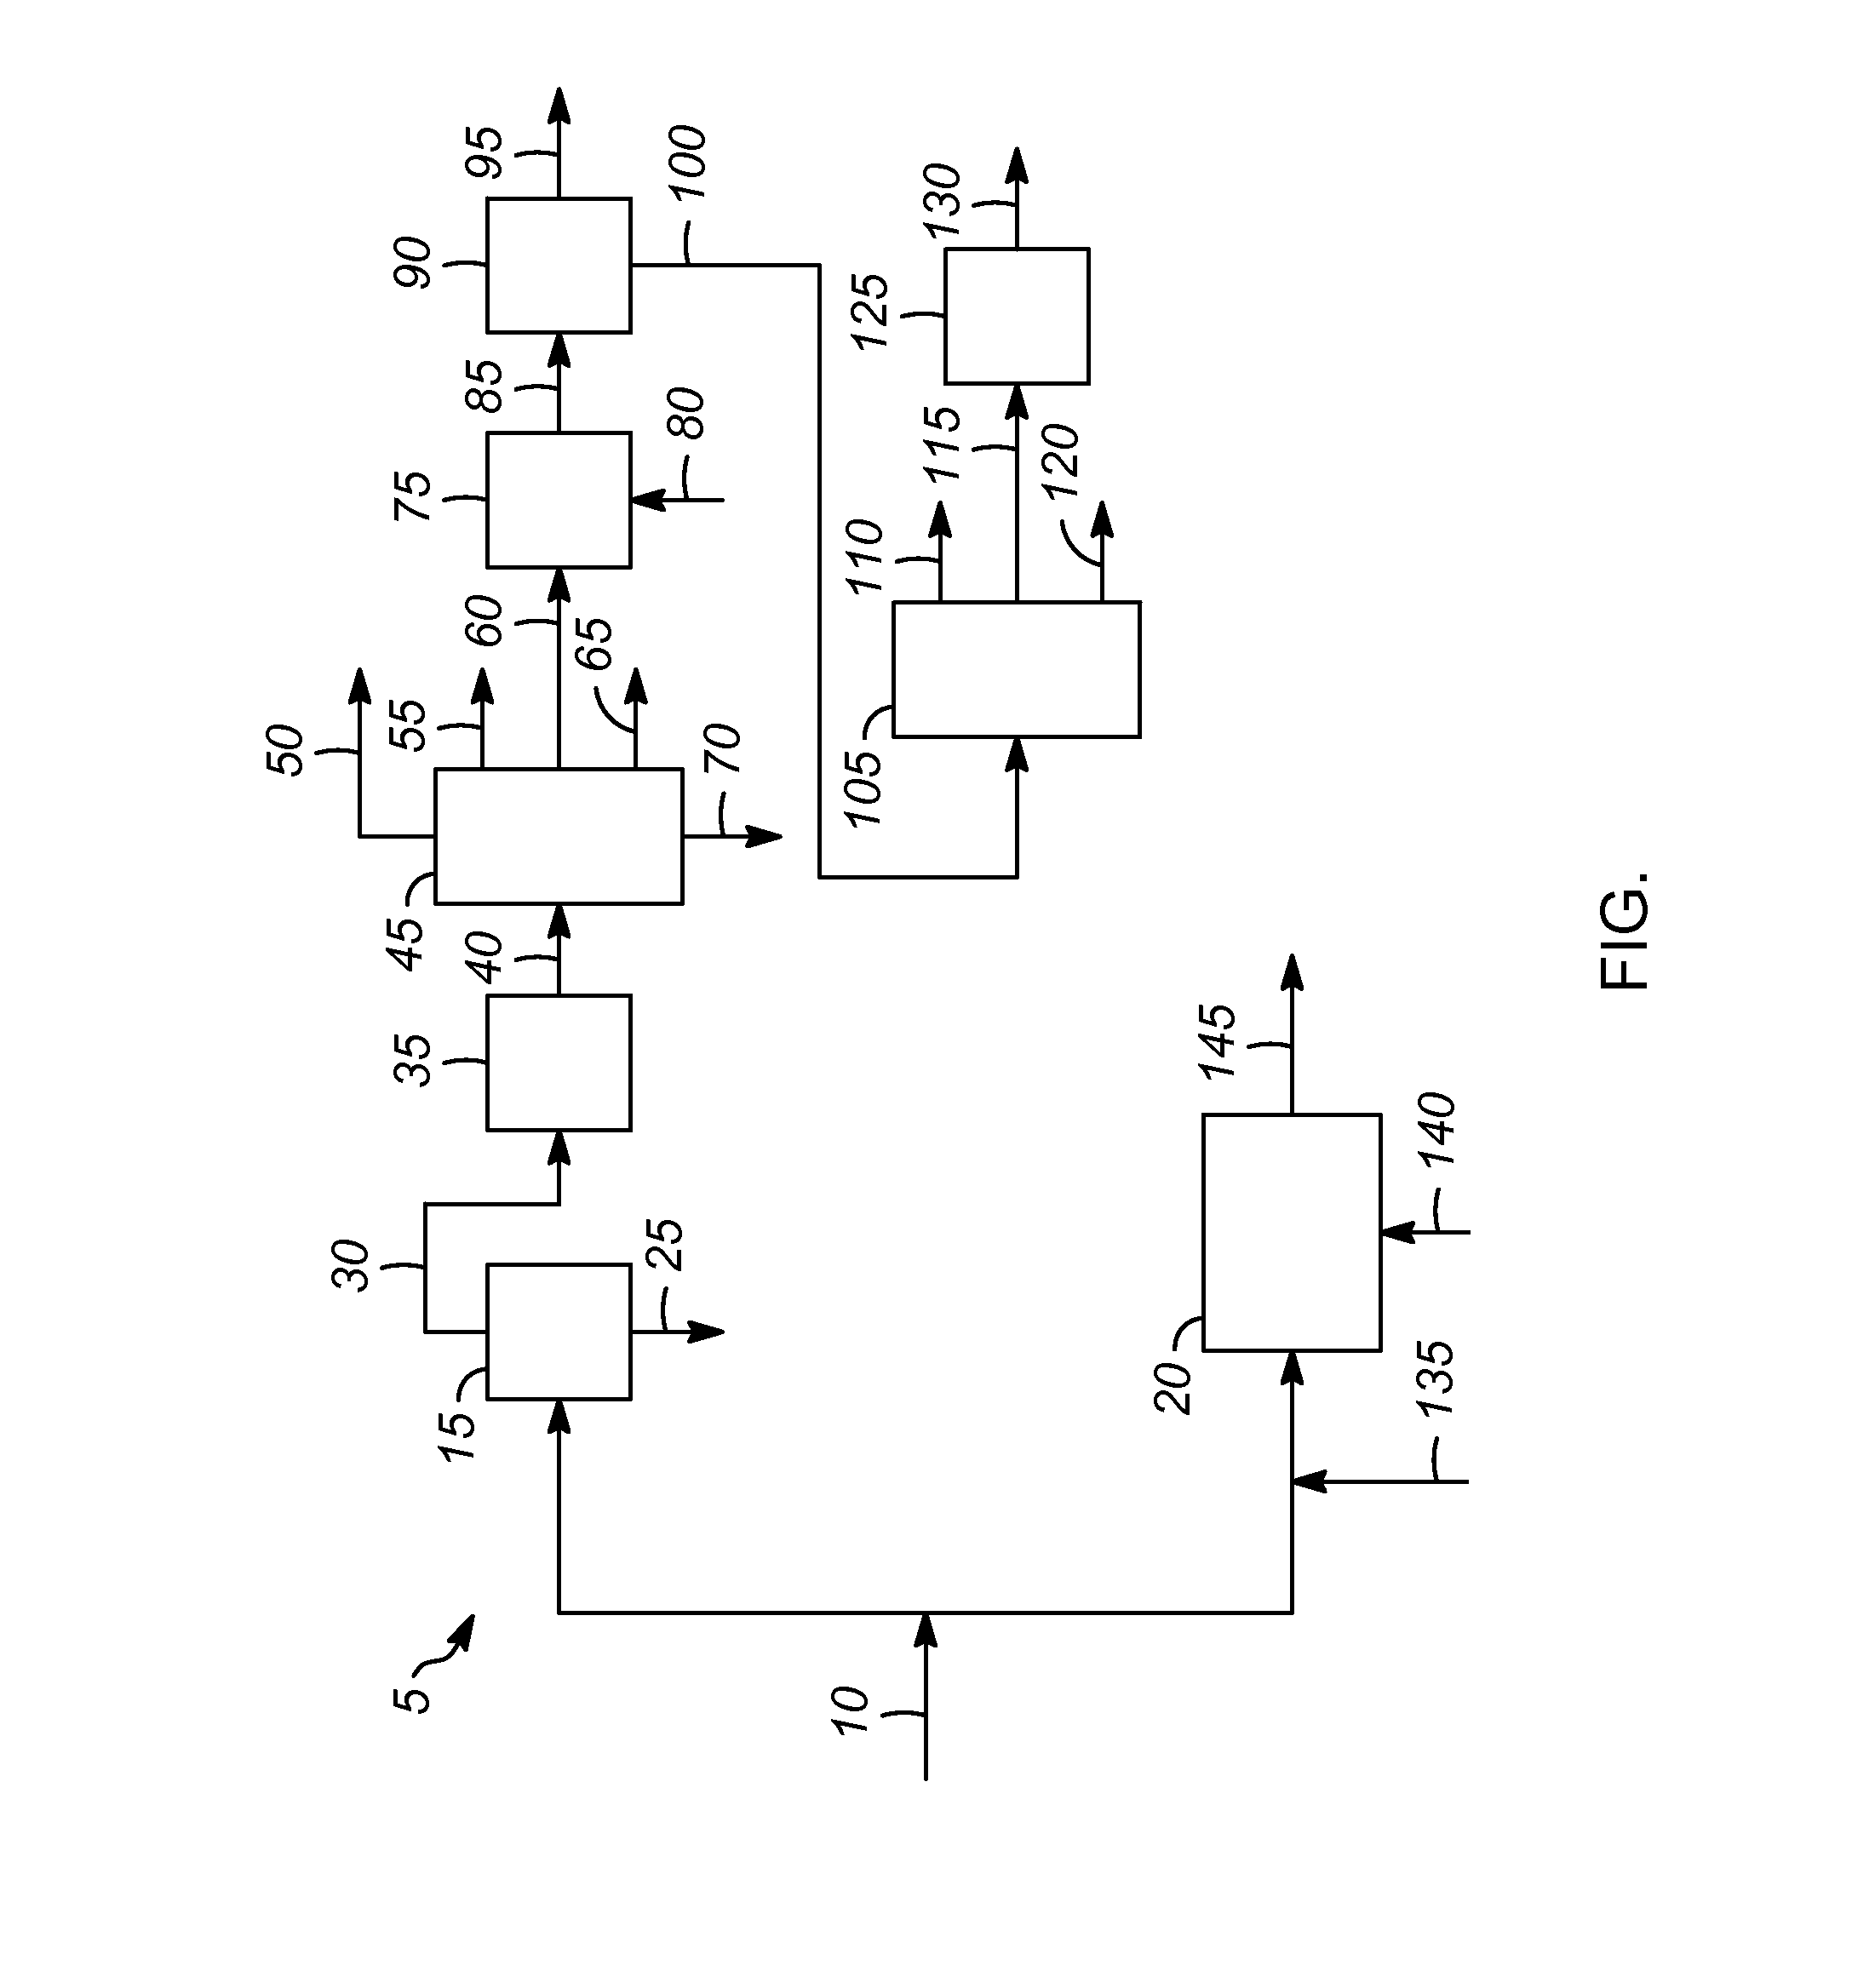 Process for producing olefins from a coal feed